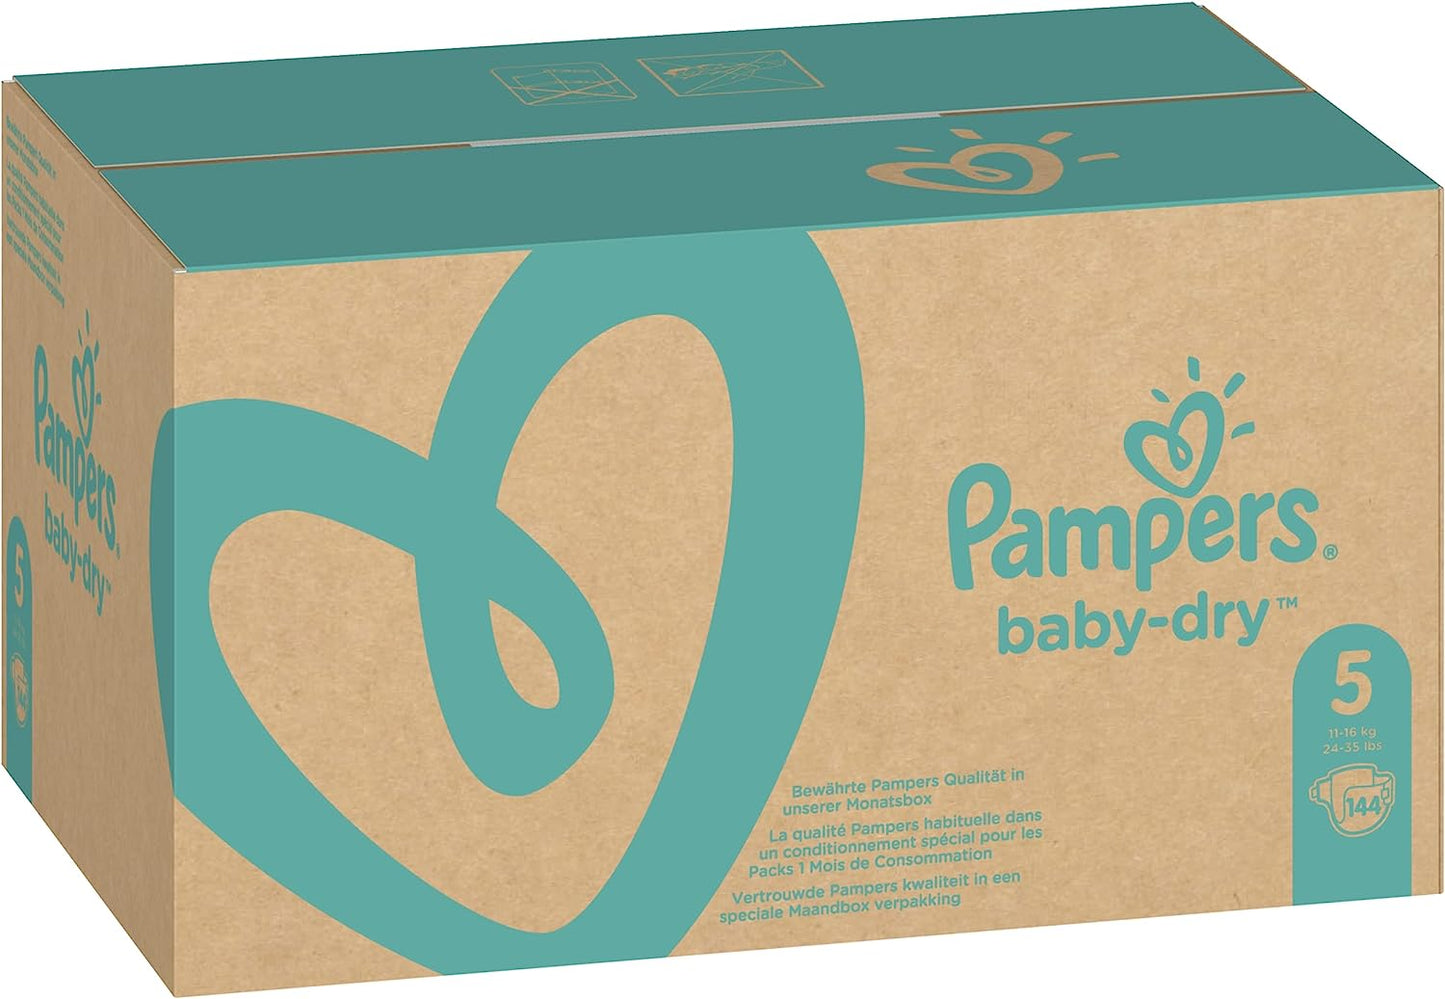 Pampers Baby-Dry Nappies Size 5 Walker, 144 Nappies, 11-16kg